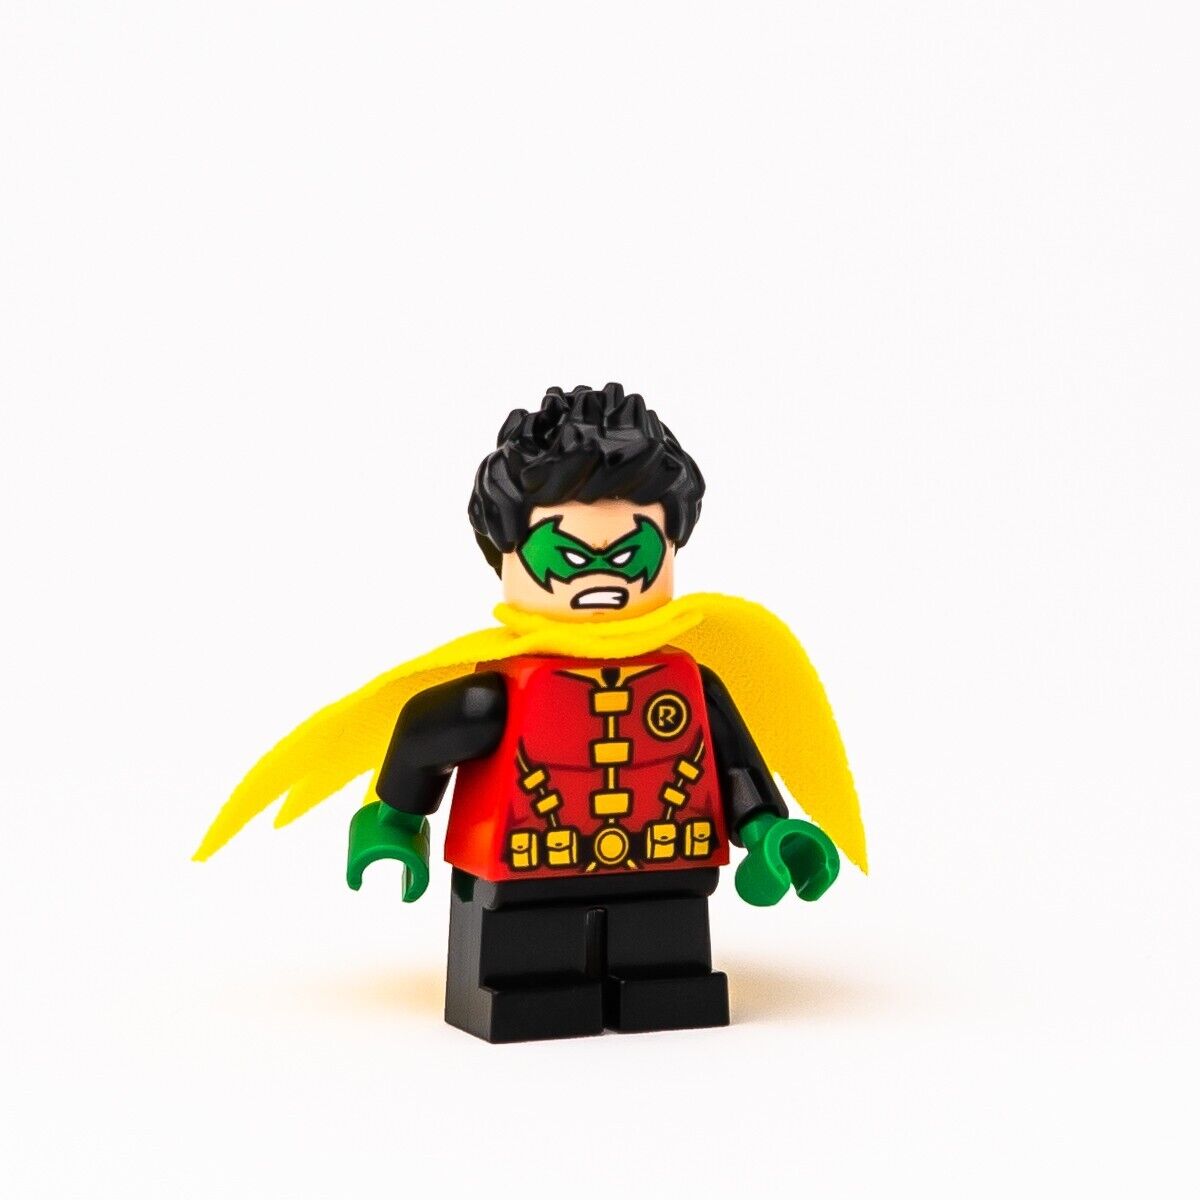 New LEGO Robin - Green Mask, Short Legs, Yellow Cape Minifig - DC Super Heroes